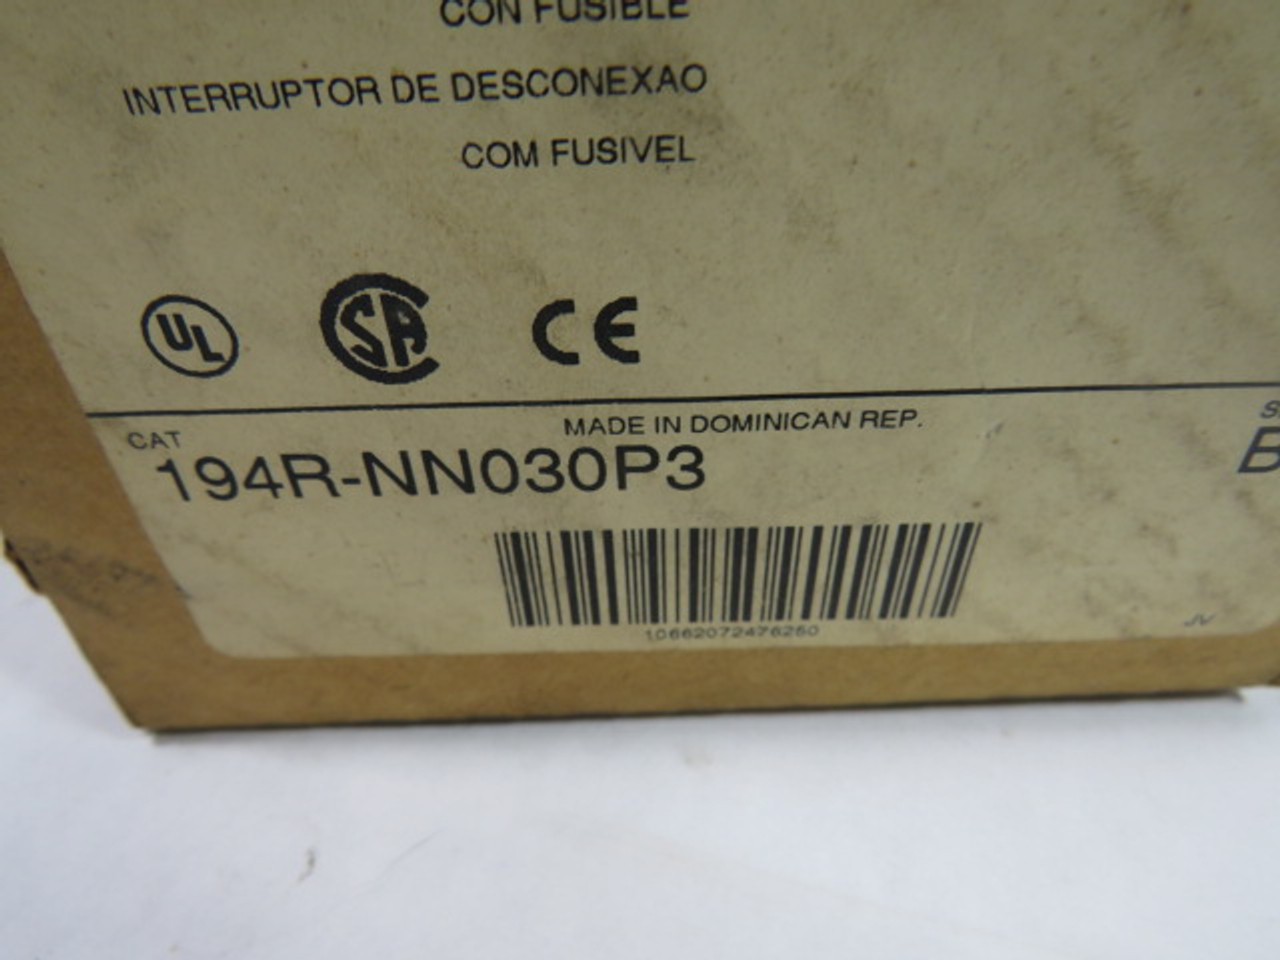 Allen-Bradley 194R-NN030P3 Series B Non-Fused Disconnect Switch ! AS IS !